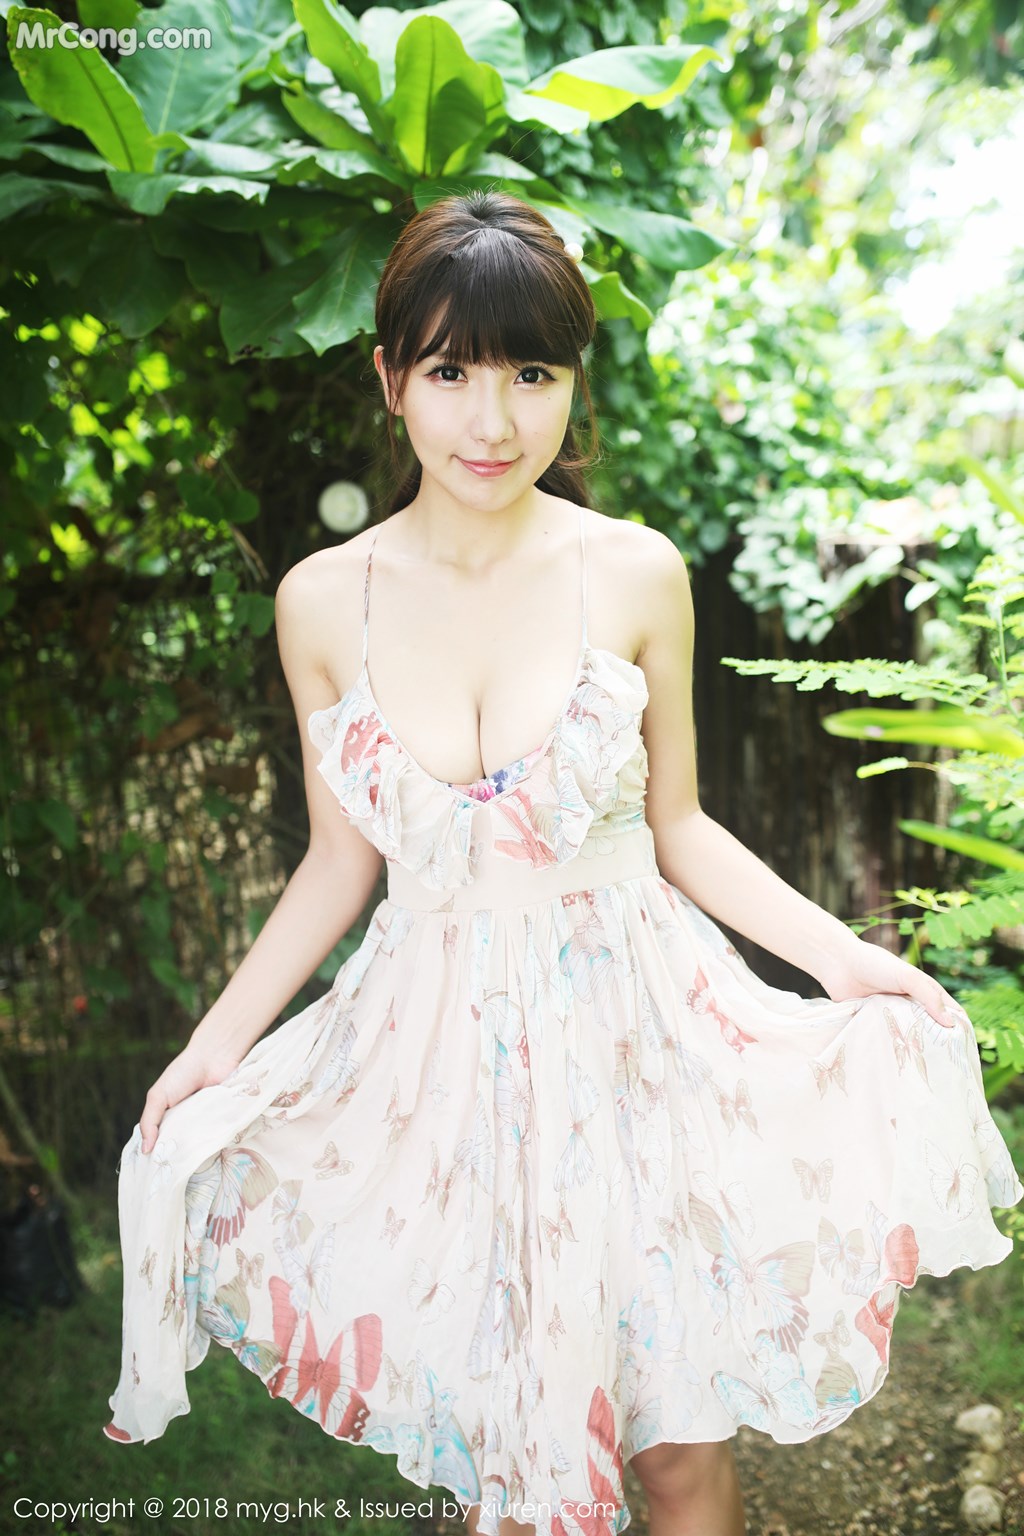 MyGirl Vol.276: Sunny Model (晓 茜) (66 pictures) photo 2-1